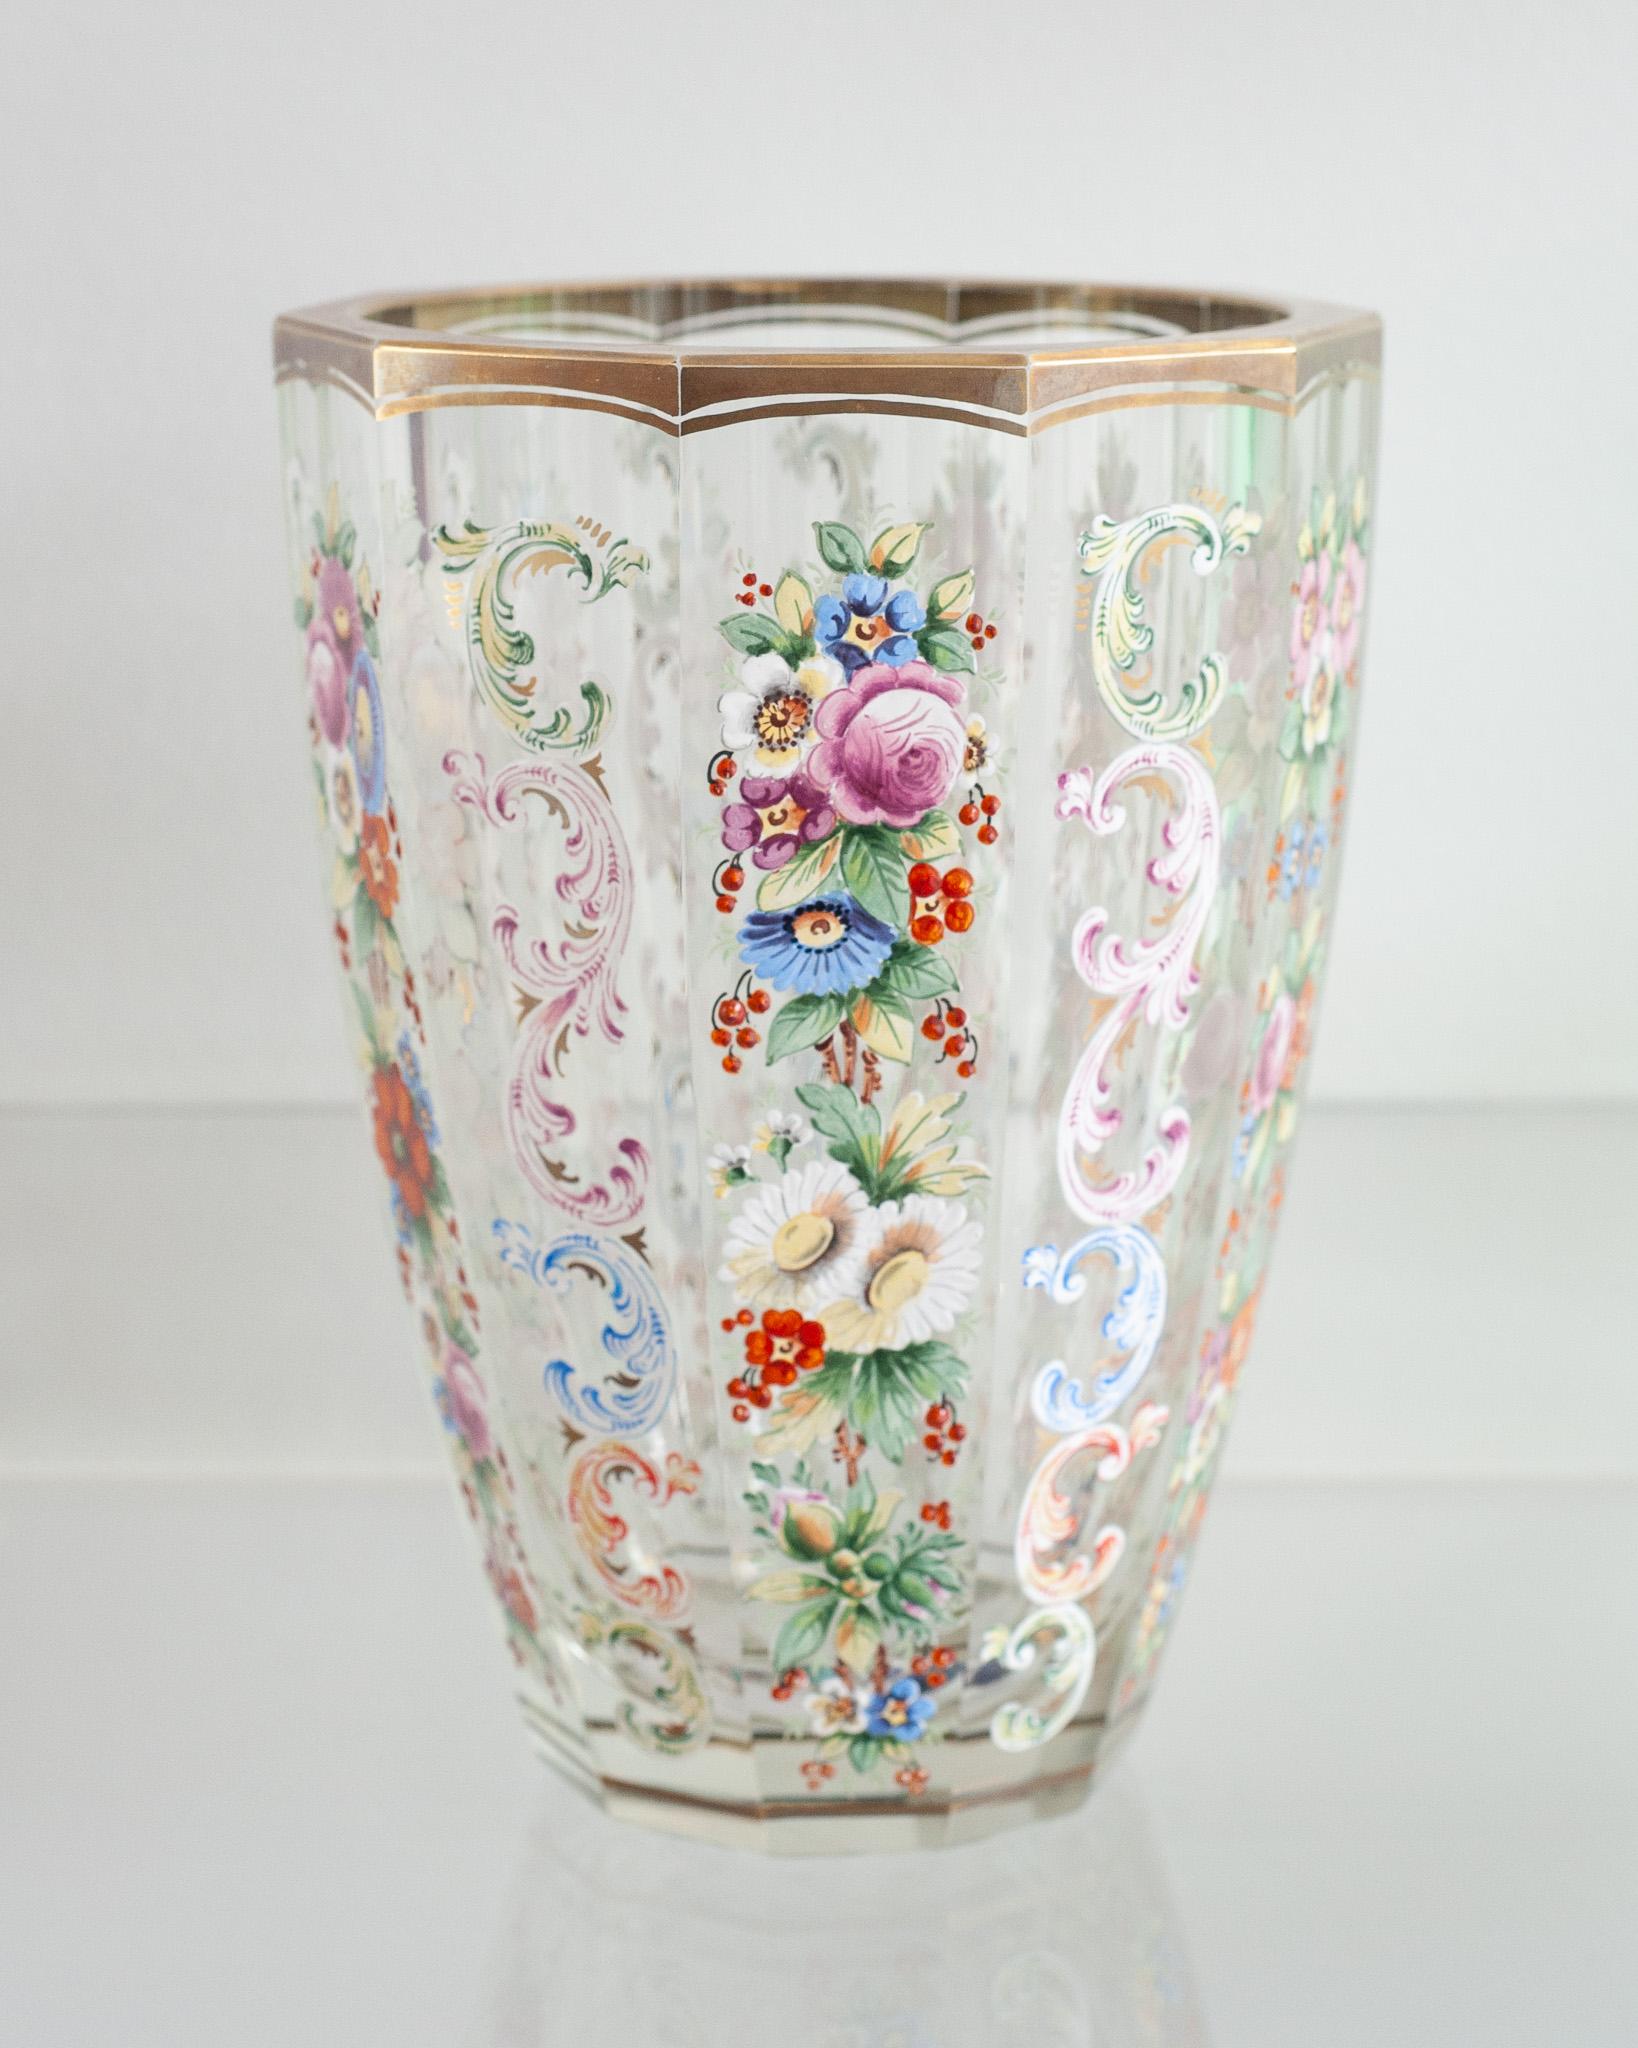 Antique Moser Multicolored Hand Painted Floral and Gilt Vase In Good Condition For Sale In Toronto, ON